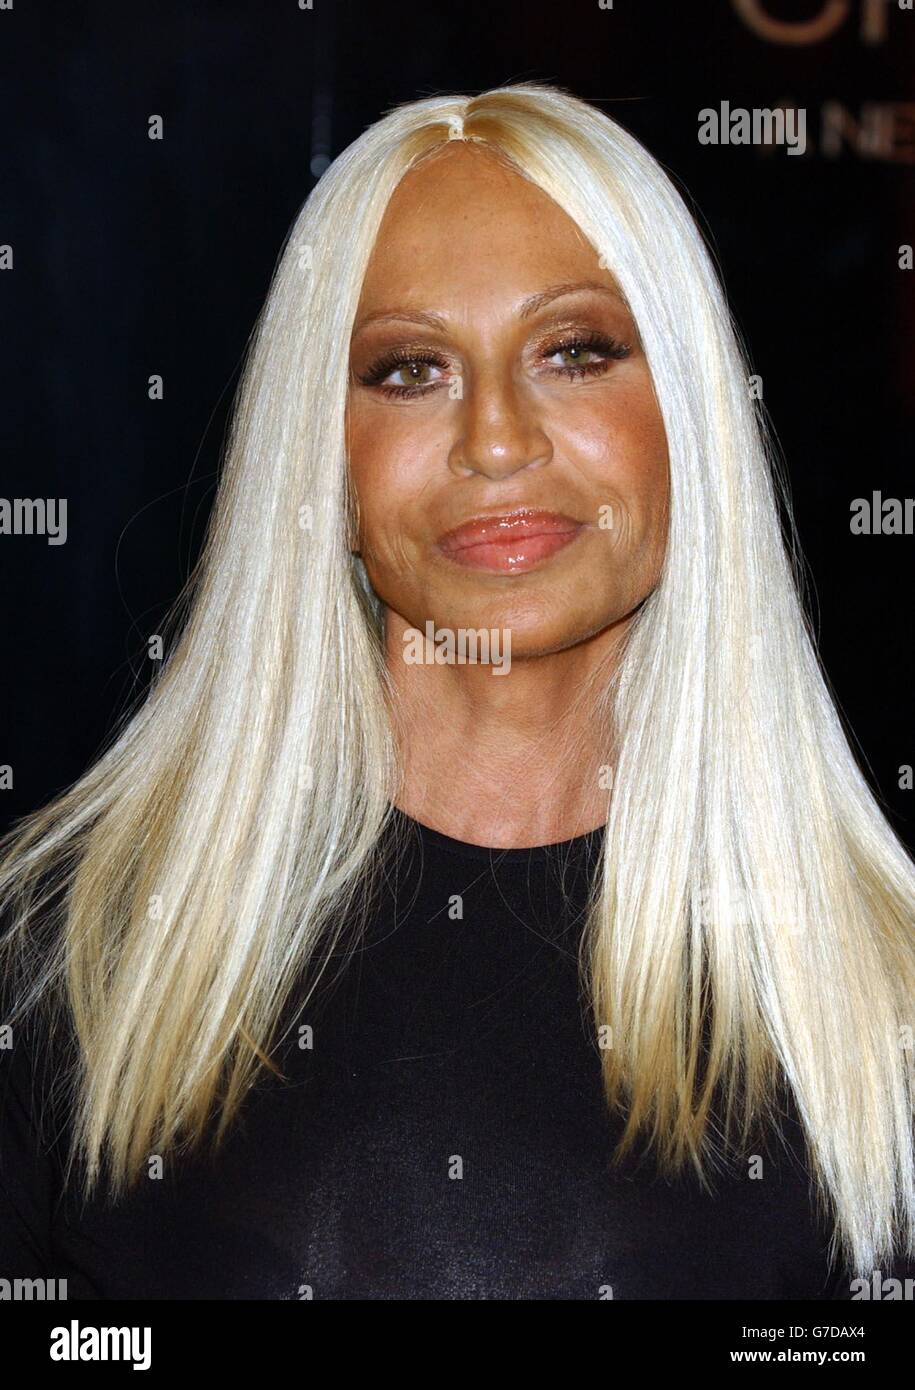 Fashion designer Donatella Versace during the launch her new fragrance Crystal Noir held at Harrods in central London. Stock Photo